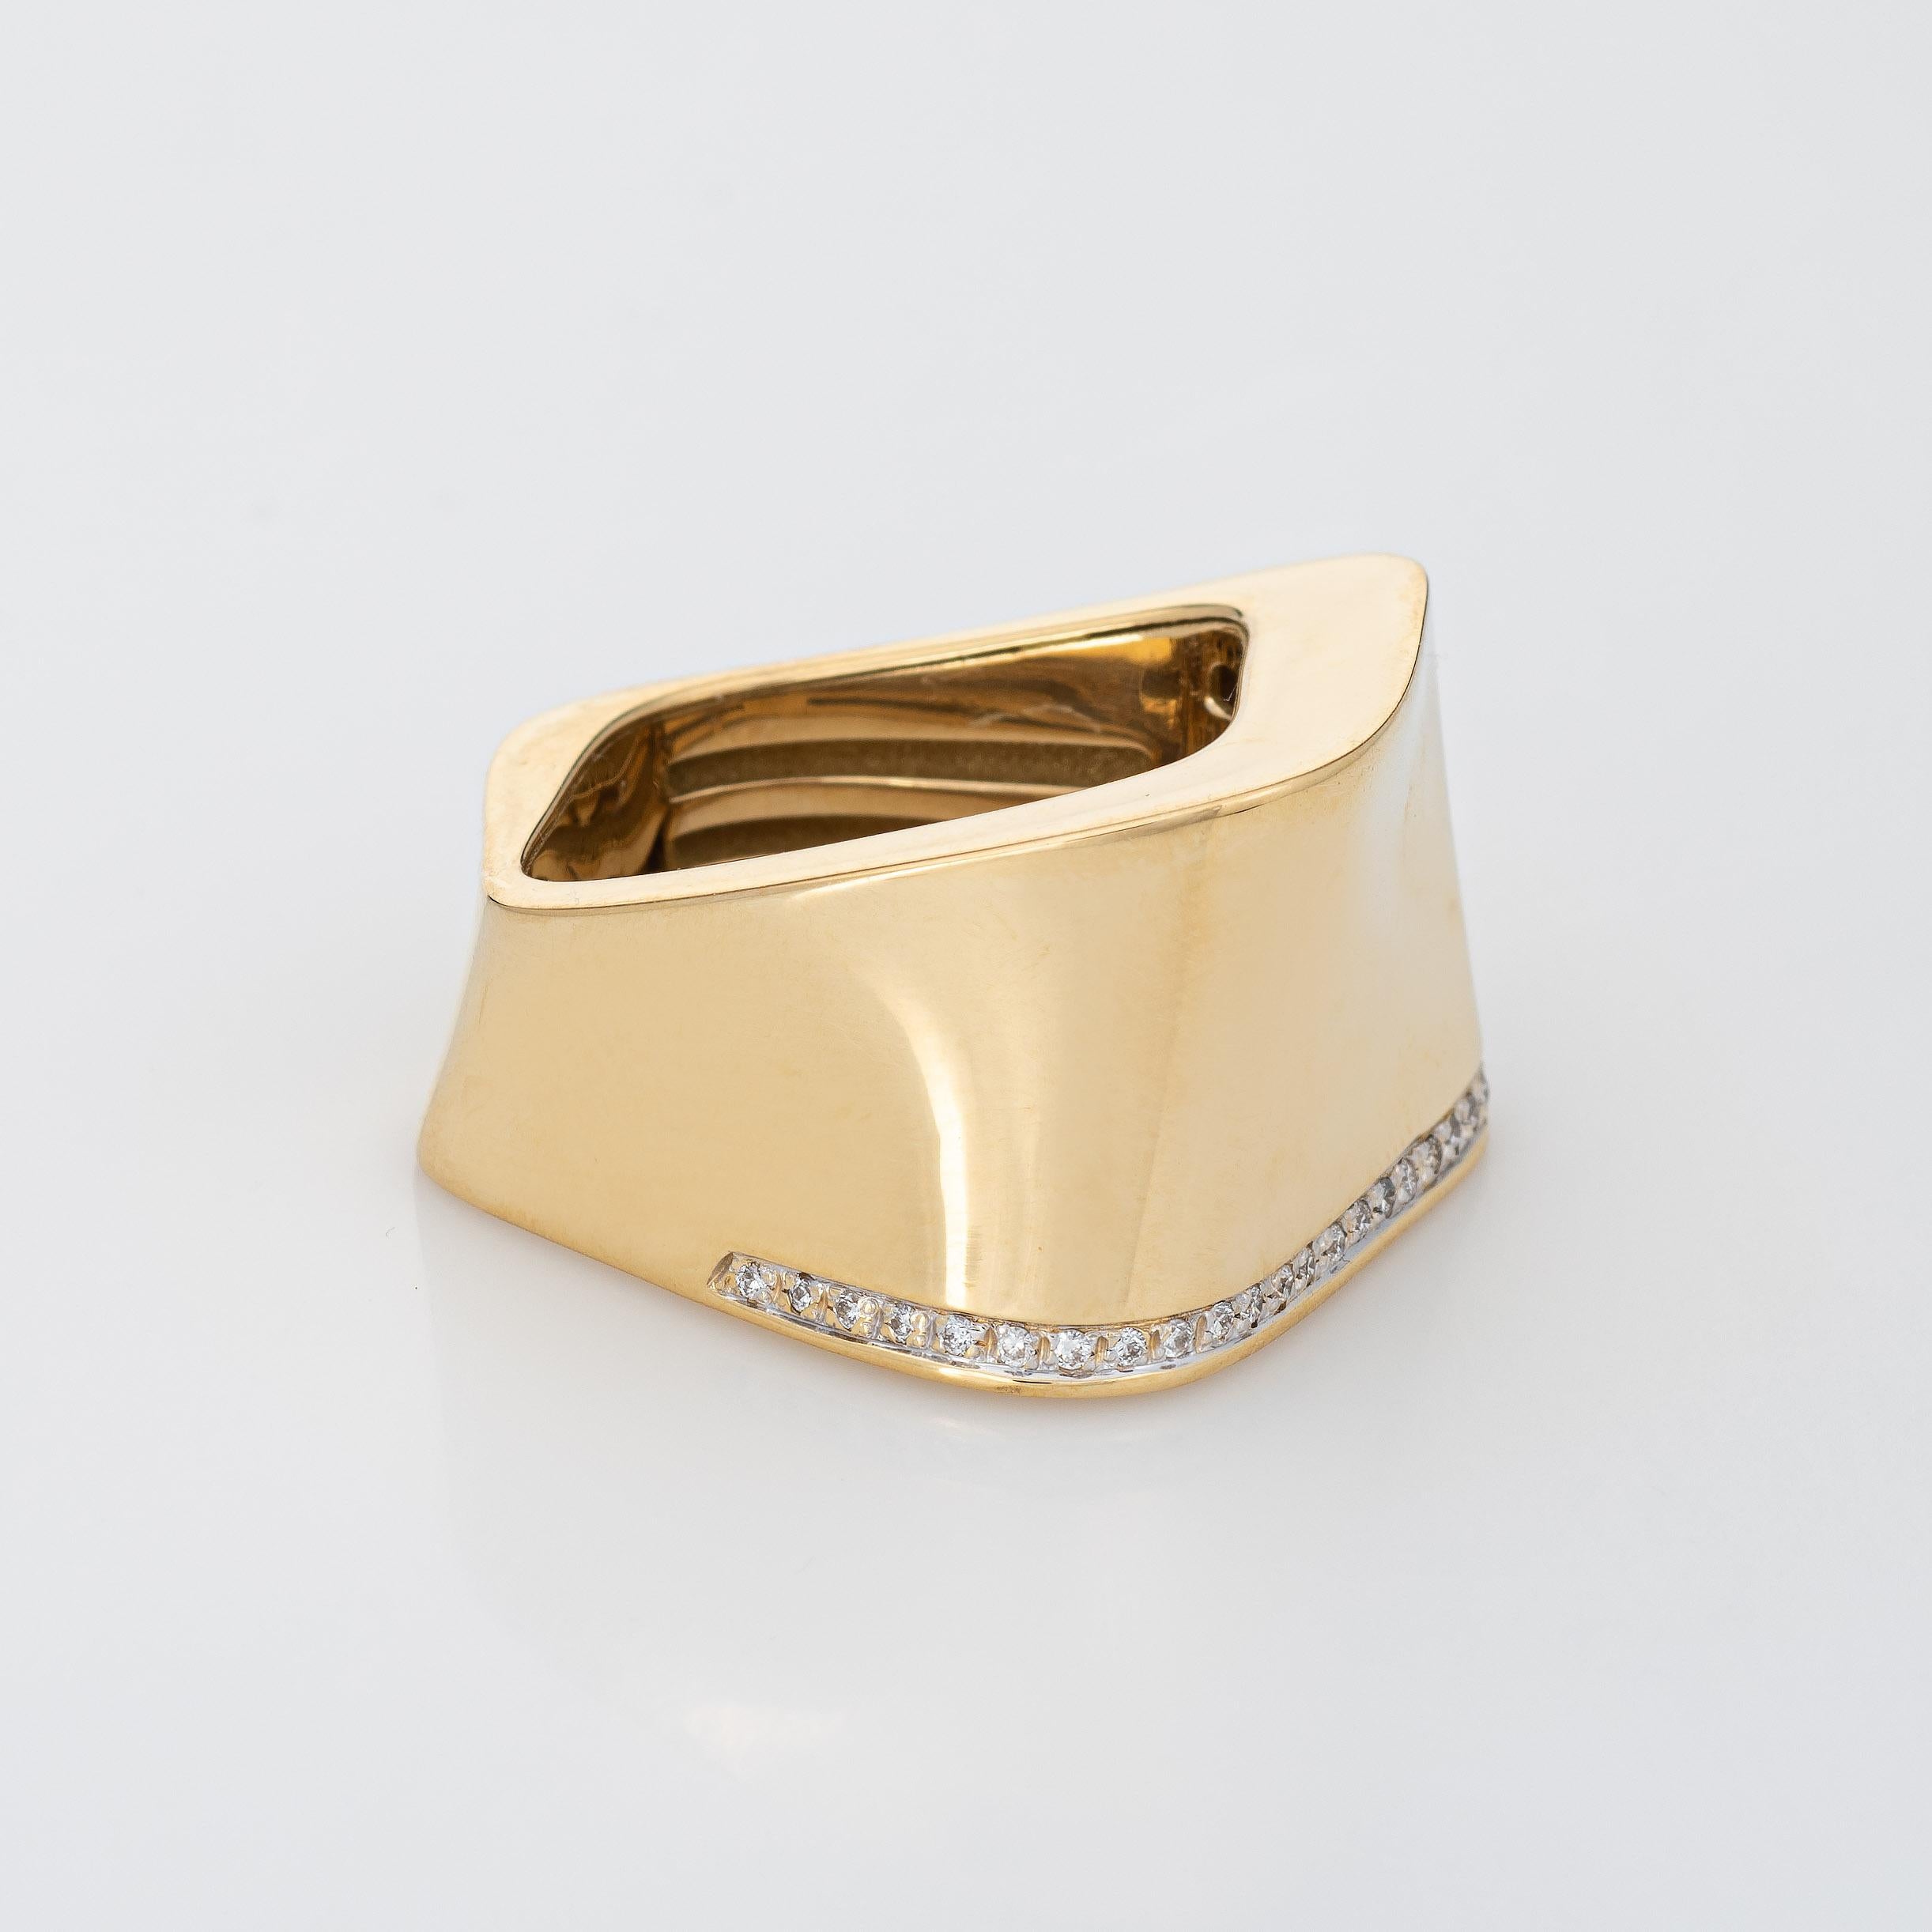 Stylish geometric diamond ring (circa 1990s to 2000s) crafted in 18 karat yellow gold. 

Diamonds total an estimated 0.15 carats (estimated at H-I color and SI1-2 clarity). 

K di Kuore is a noted Italian jeweler, known for classic pieces with a